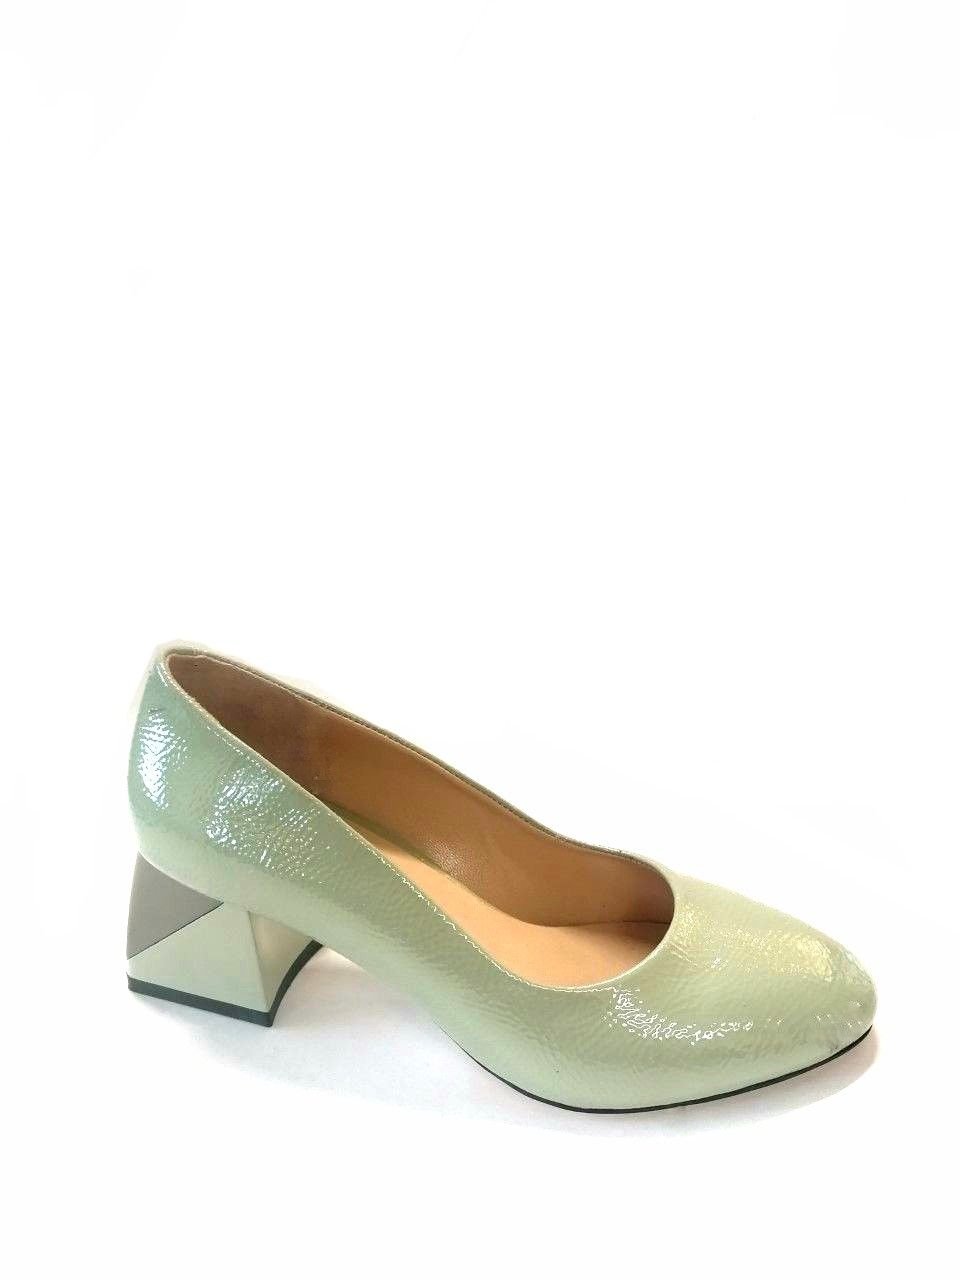 shoes patent light green color shoes with ımported heel